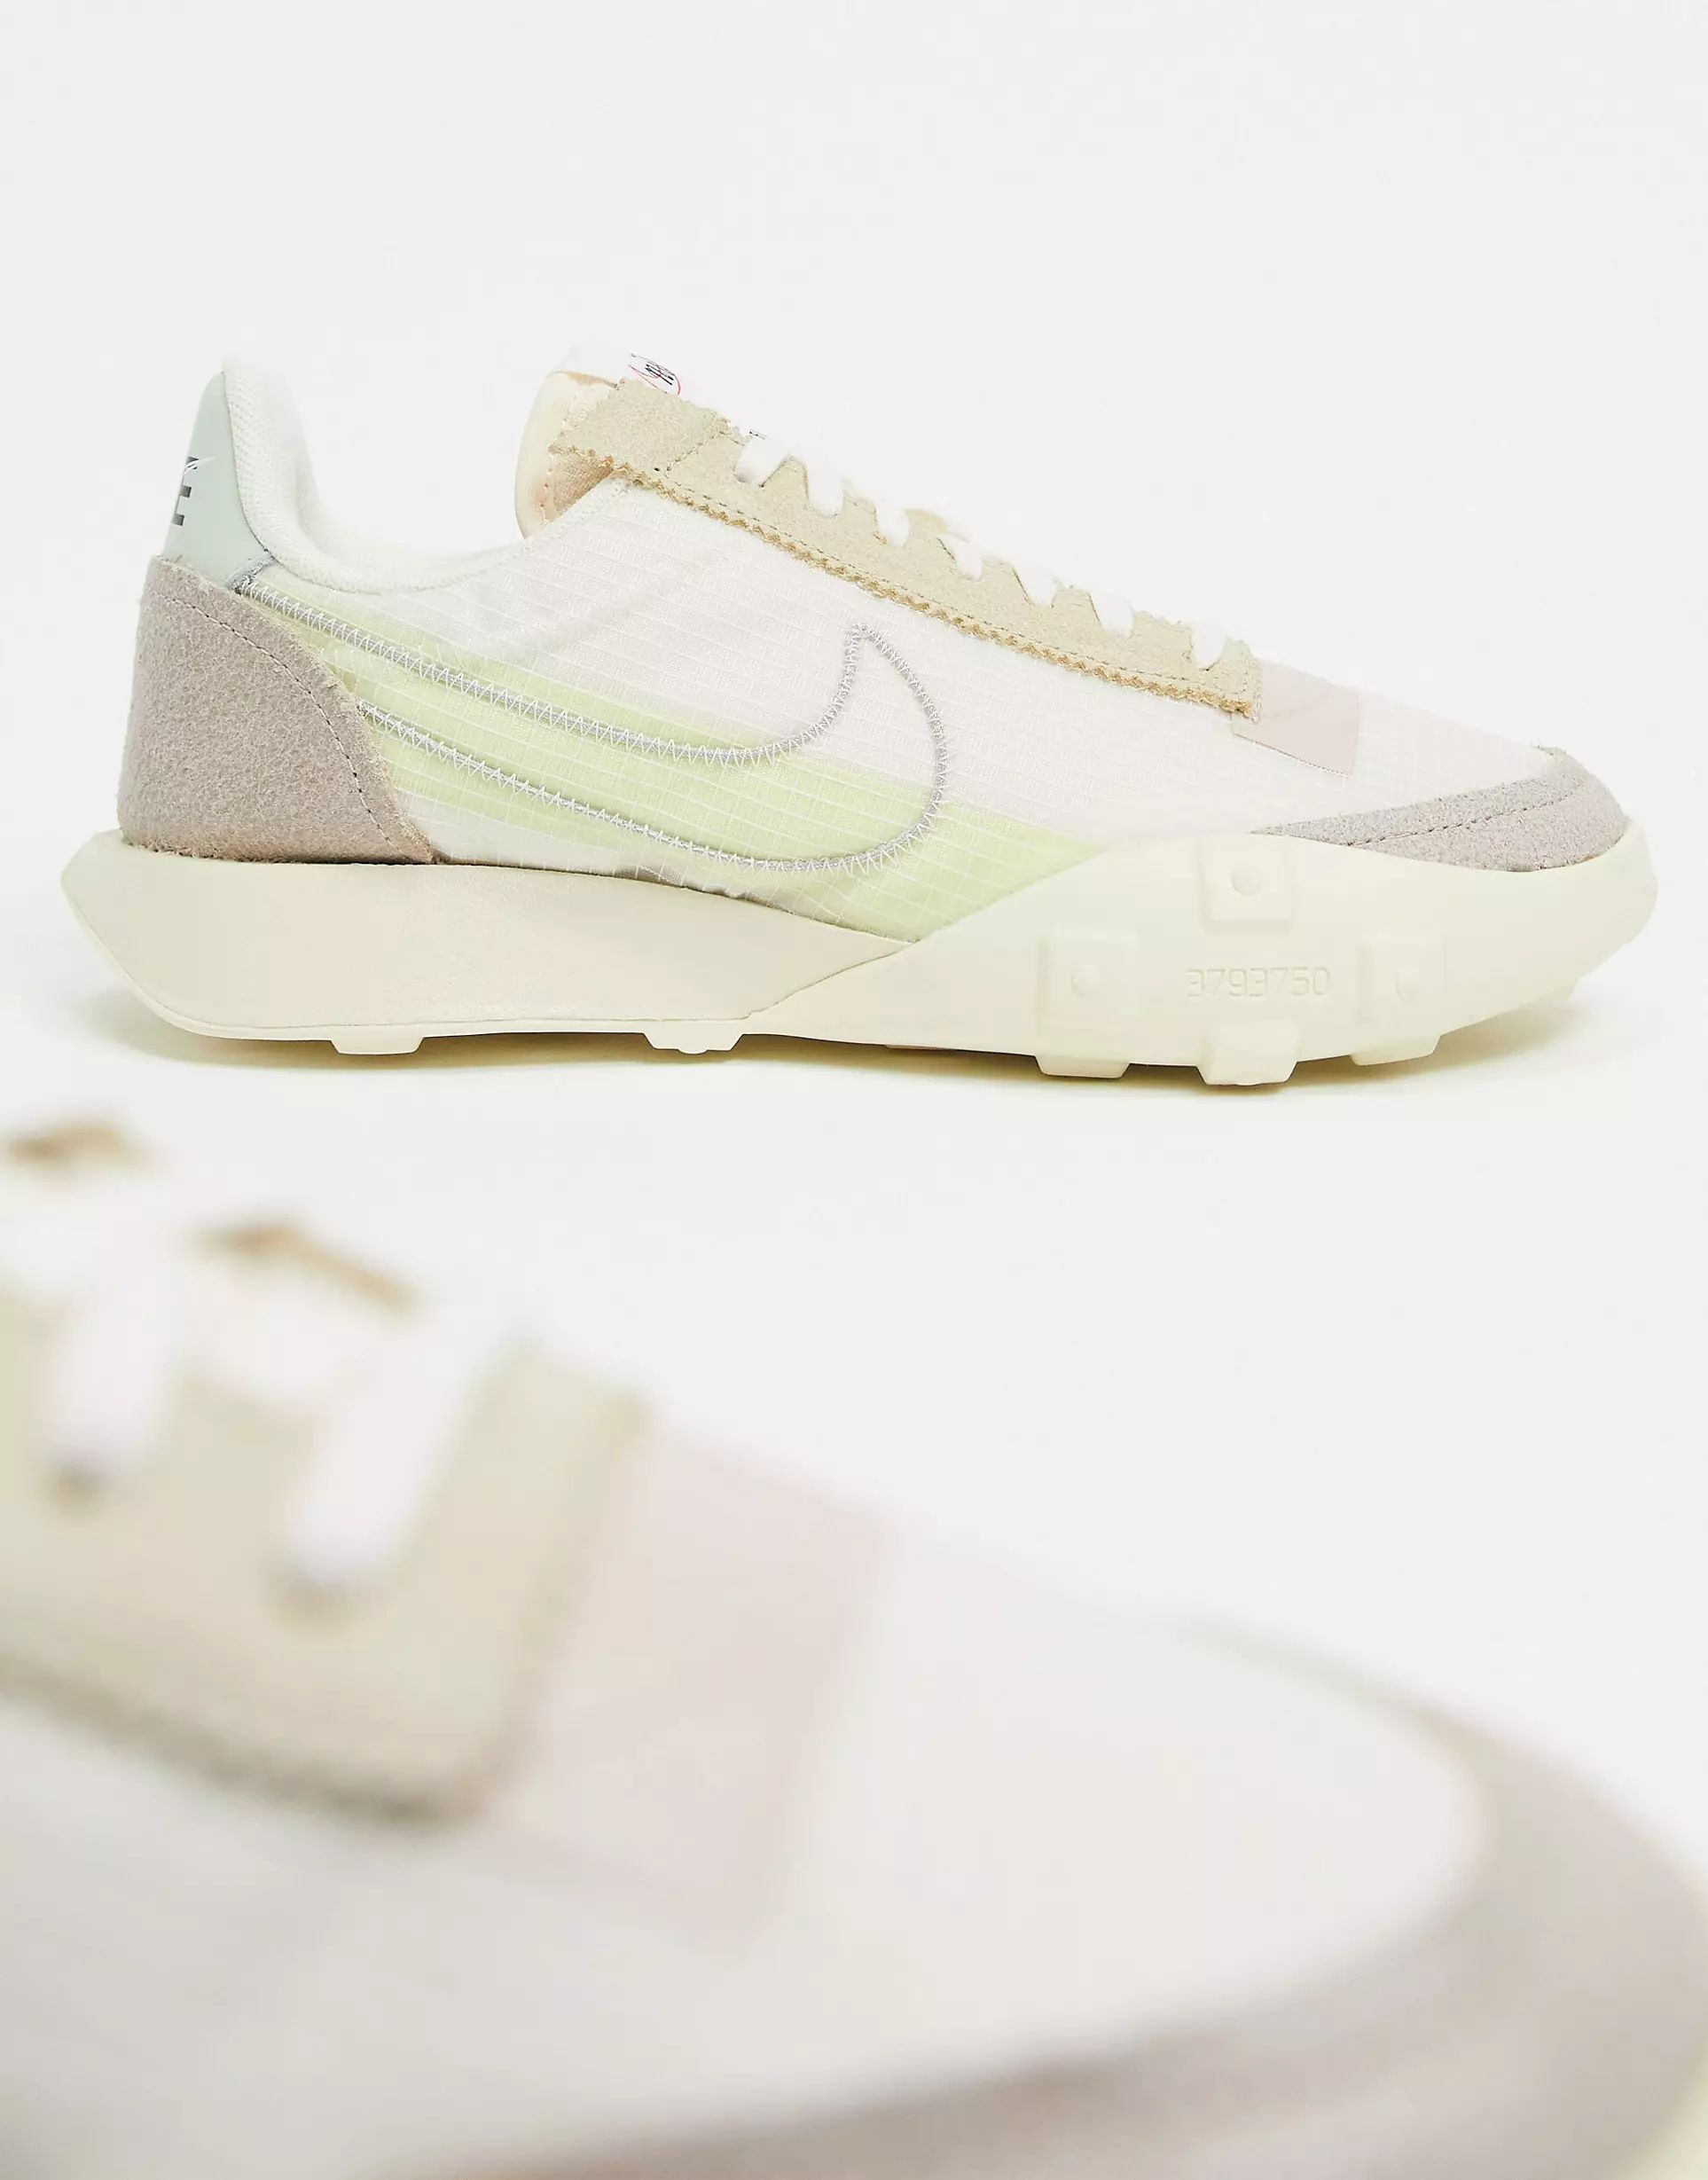 Nike Waffle Racer LX sneakers in beige and gray | ASOS (Global)